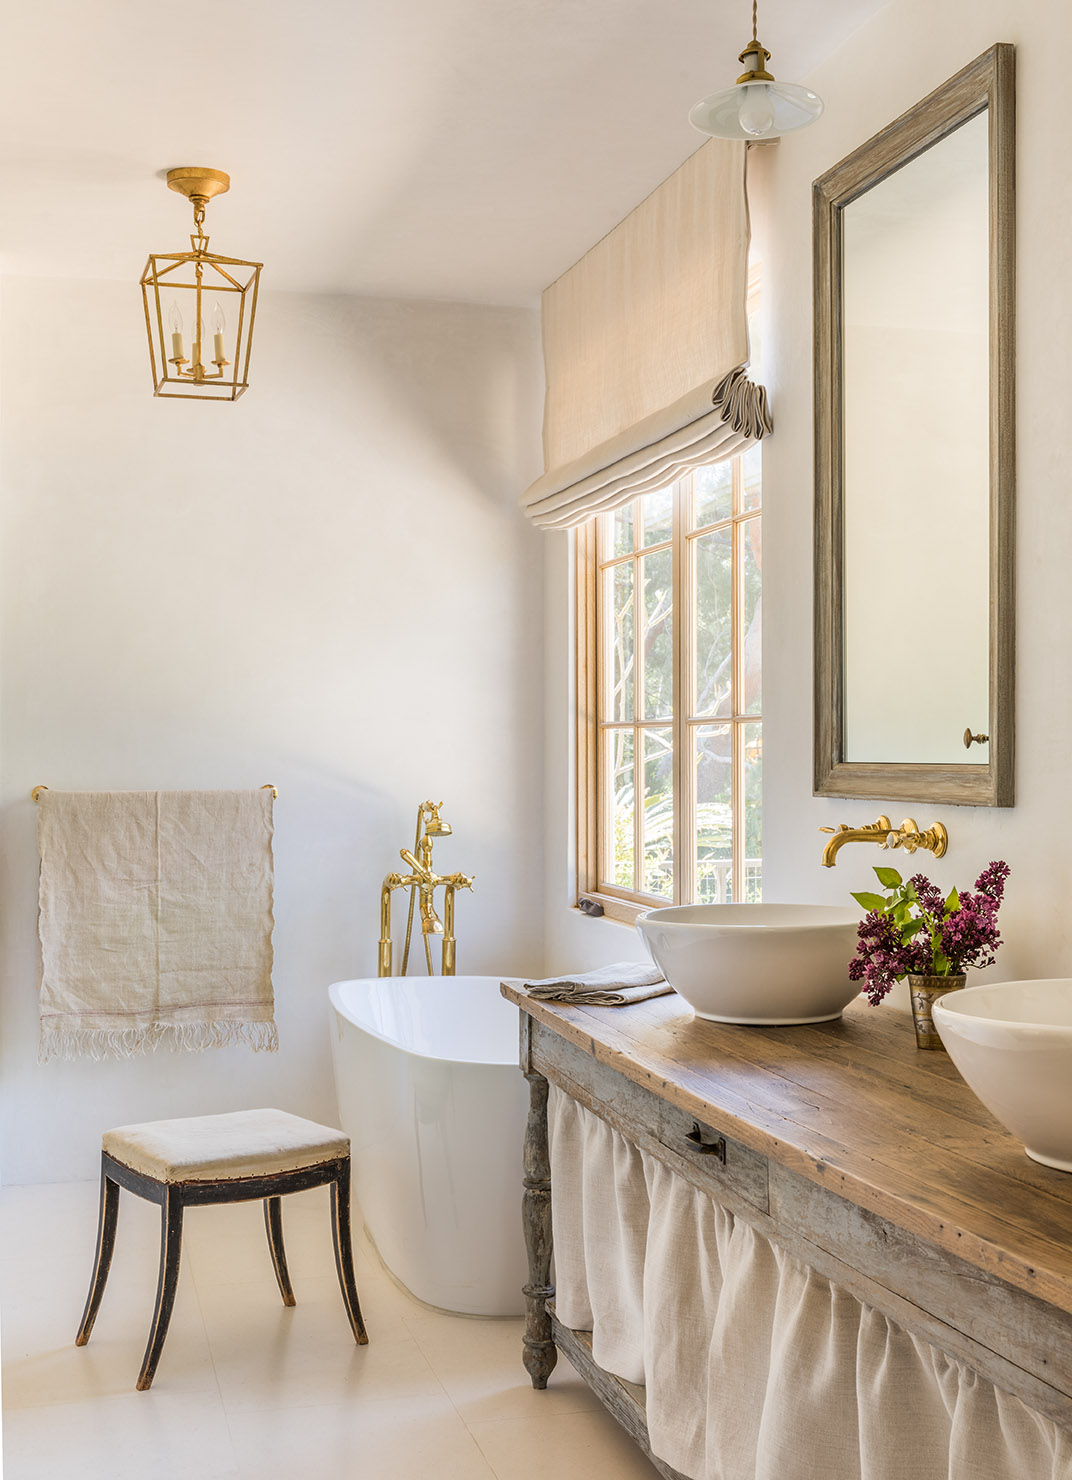 Breathtaking, timeless, and tranquil bathroom design with natural materials, European antiques, and bespoke design from Giannetti Home. #bathroomdesign #europeancountry #sophisticatedstyle #brookegiannetti